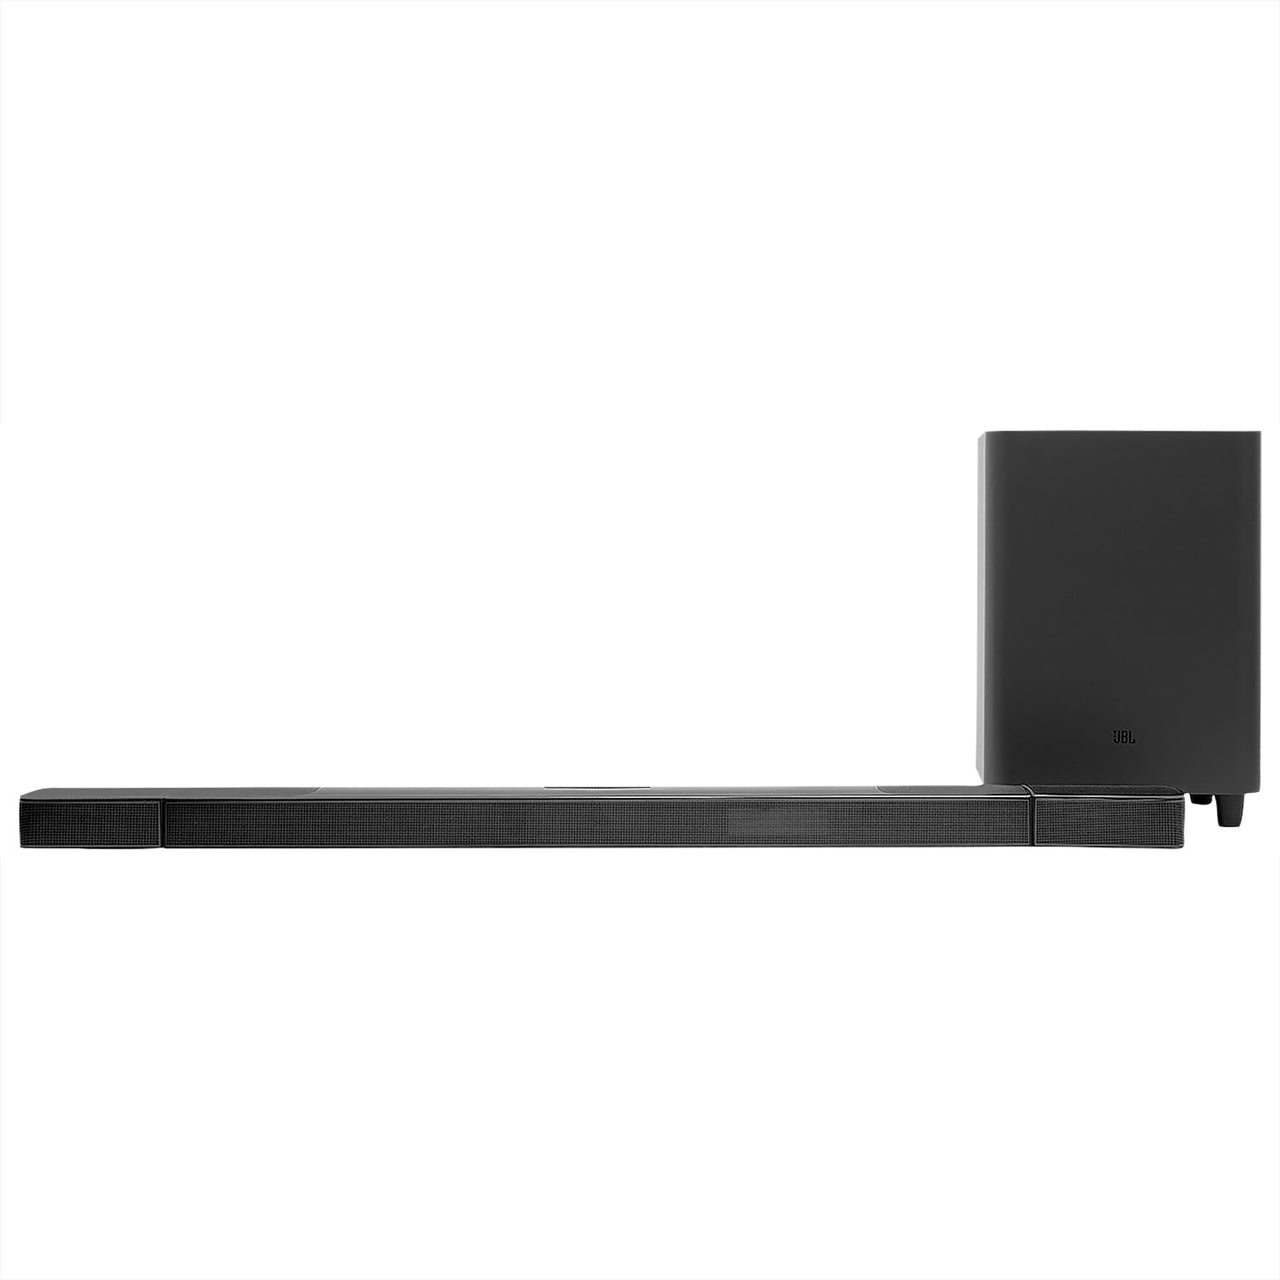 JBL Bar 820-W 9.1 Ch Atmos 4K Dolby Vision Sound Bar w/ Wireless 10” Subwoofer and Surround Speakers